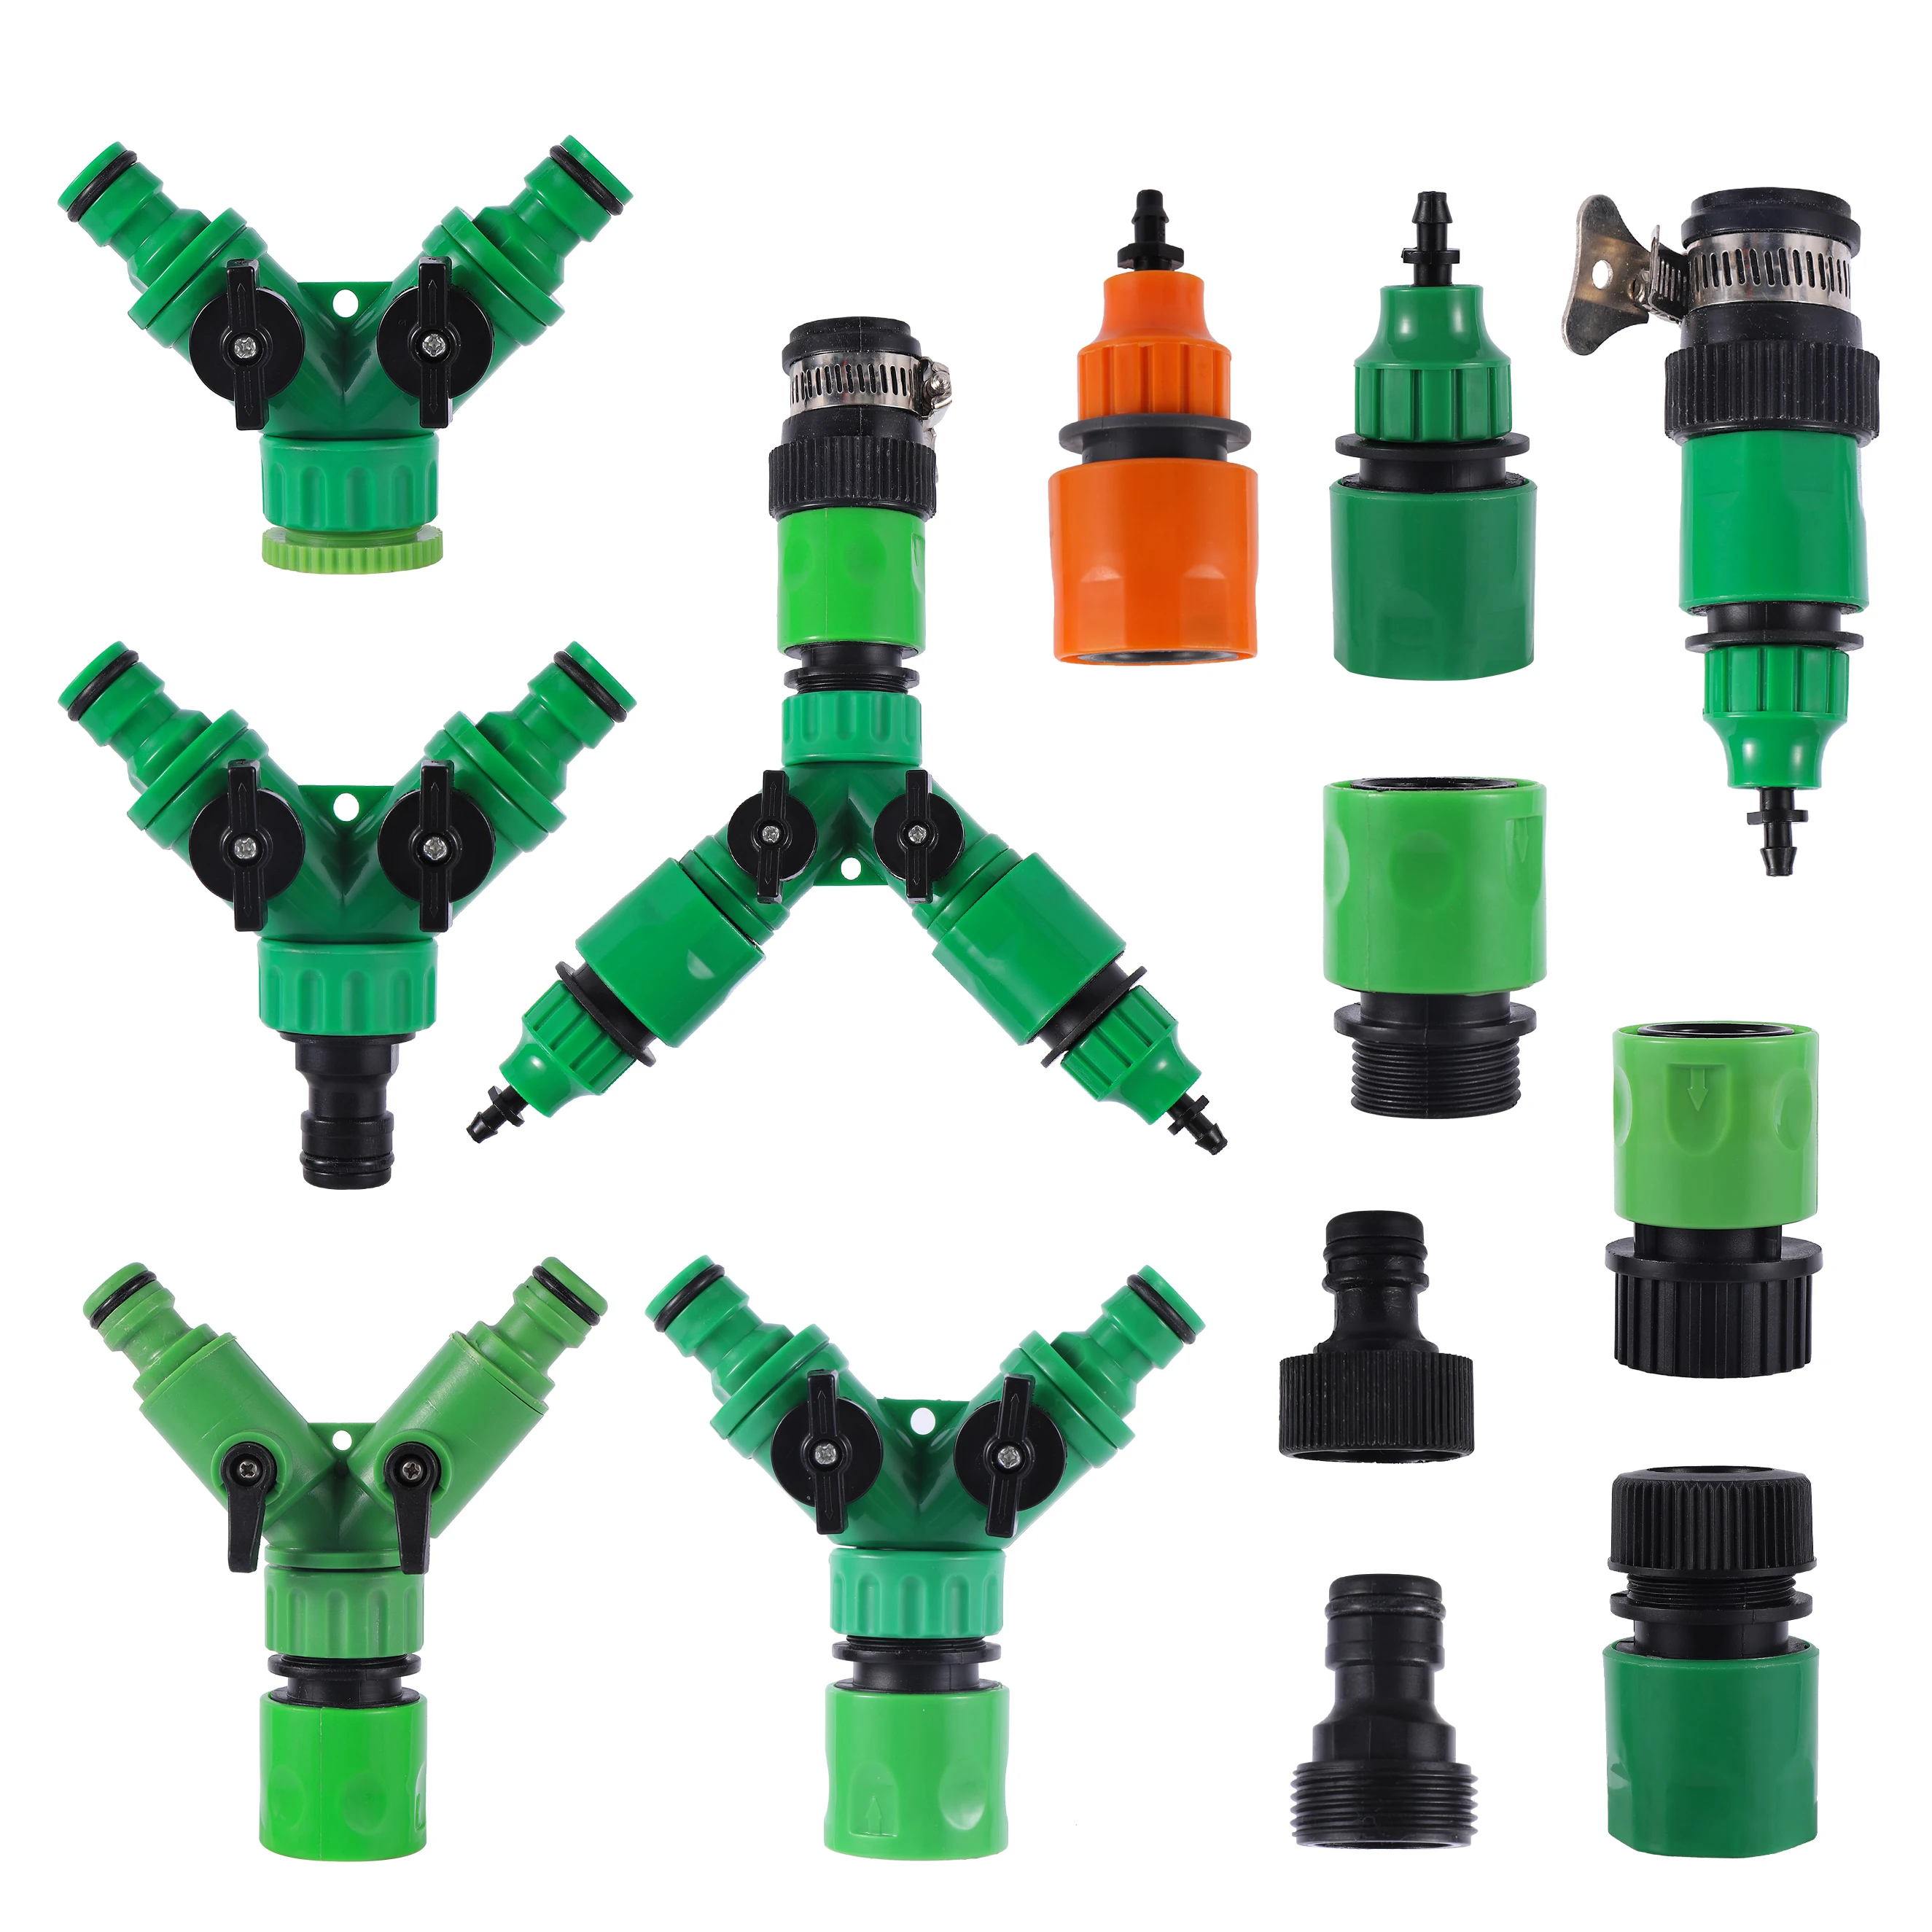 Garden Hose Quick Connector Watering Hose Adapter 3/4,16MM ,1/2 inch Euro Threaded Water Pipe Repair Connection Kit